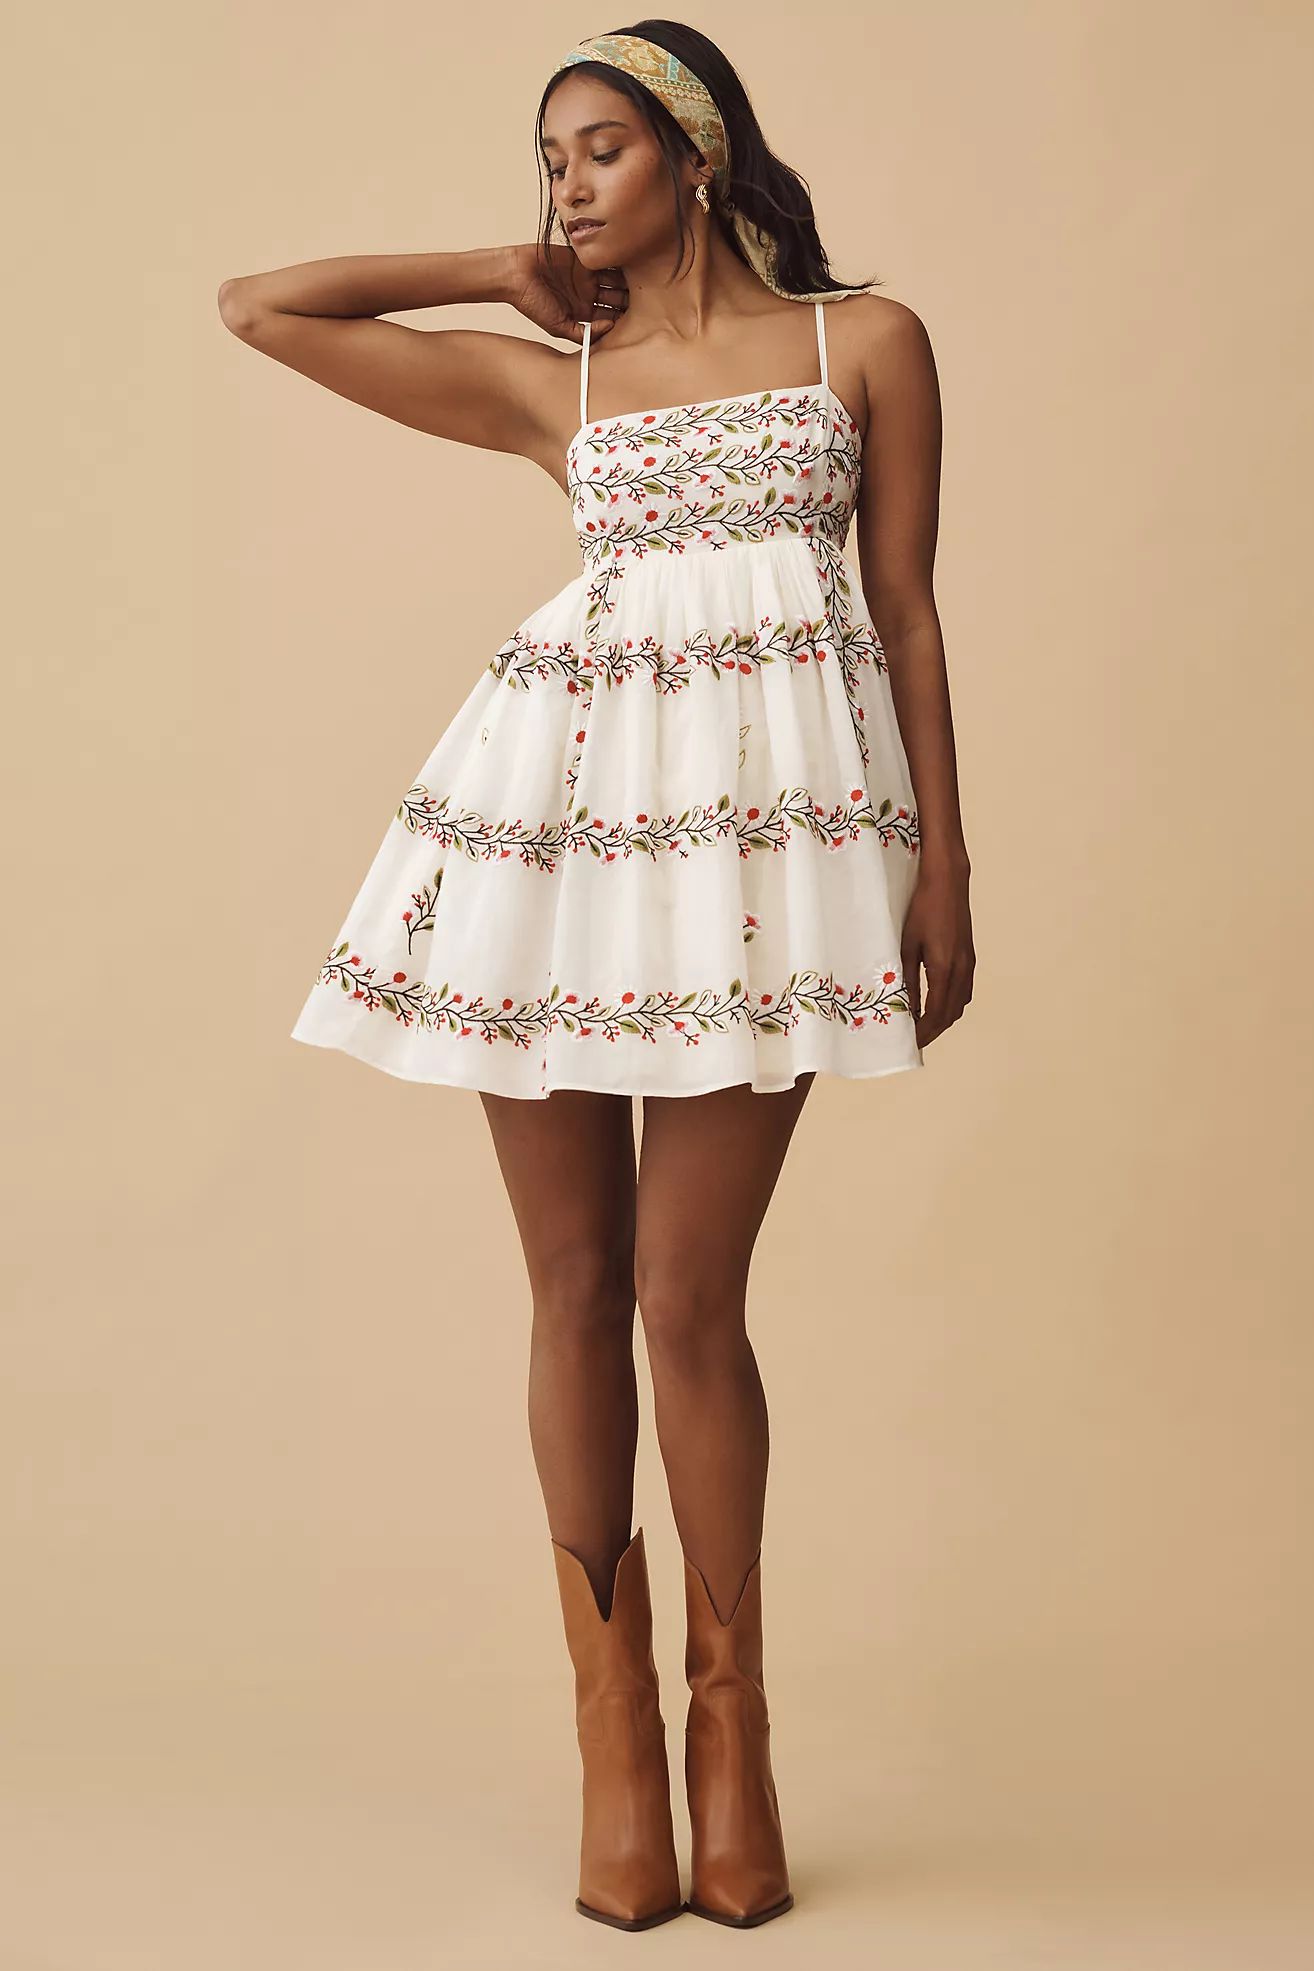 Samant Chauhan Square-Neck Floral Embroidered Mini Dress | Anthropologie (US)